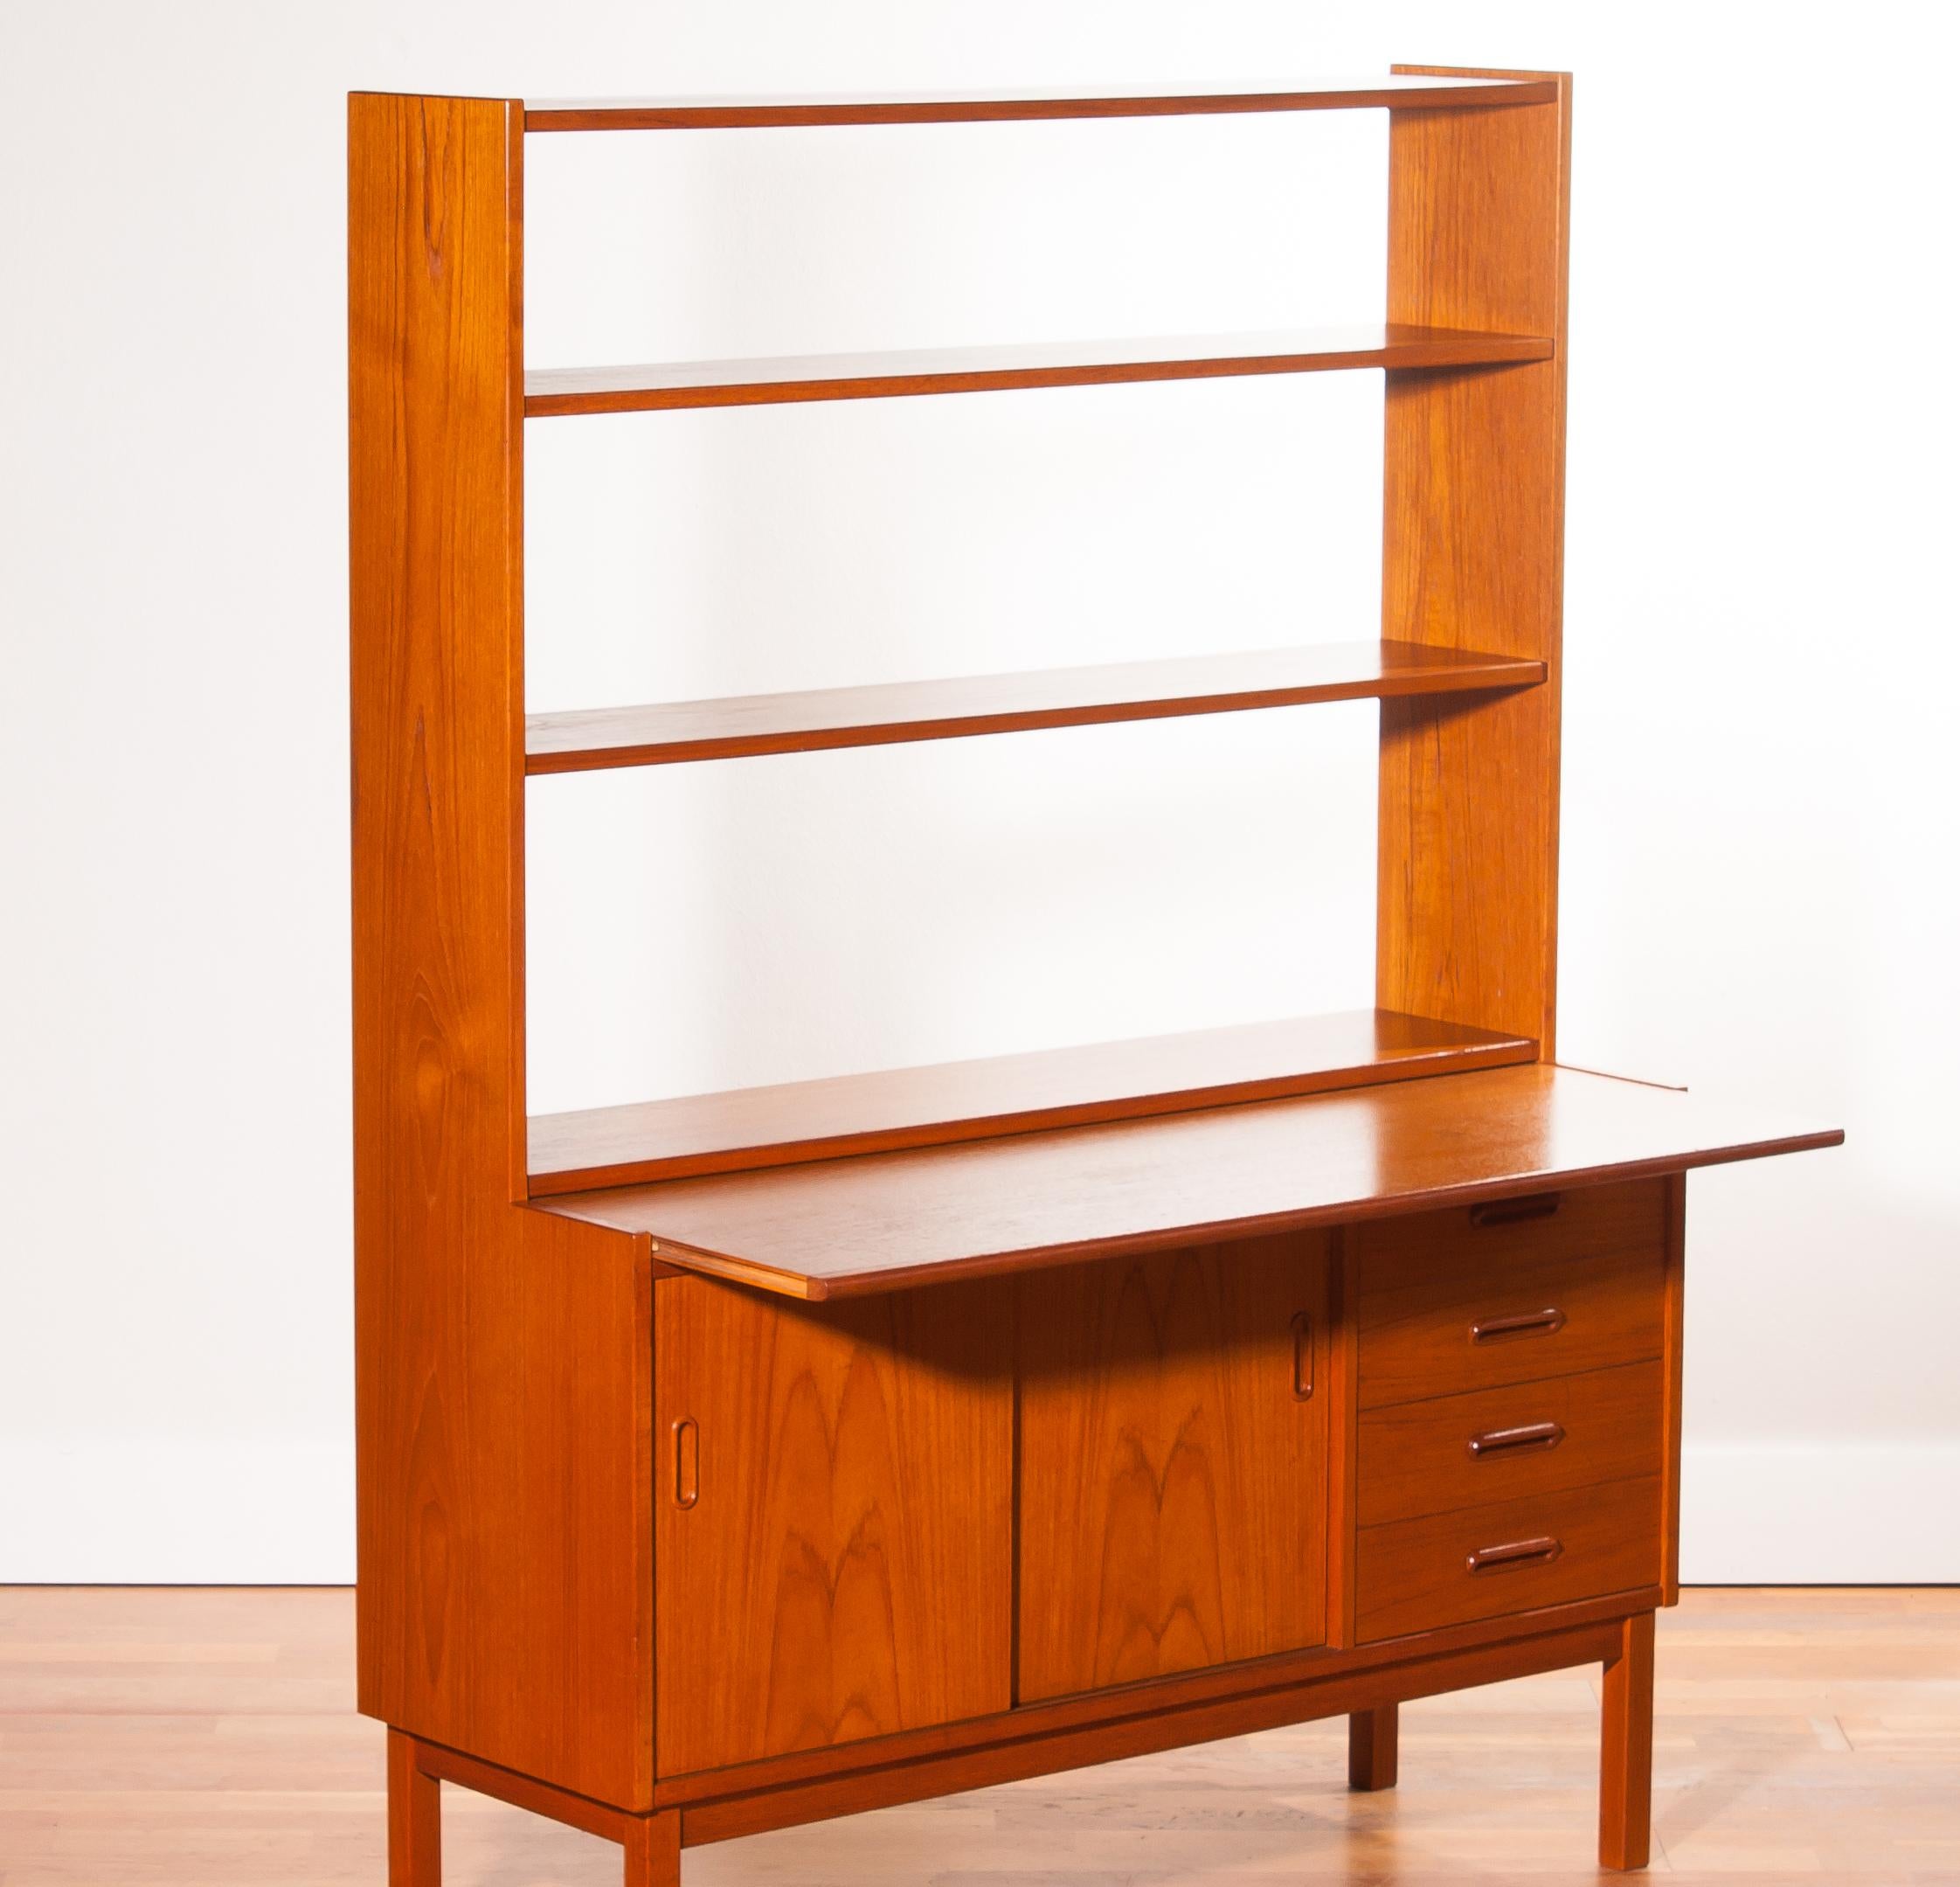 1960s, Teak Bookcase with Slidable Writing or Working Space from Sweden 4